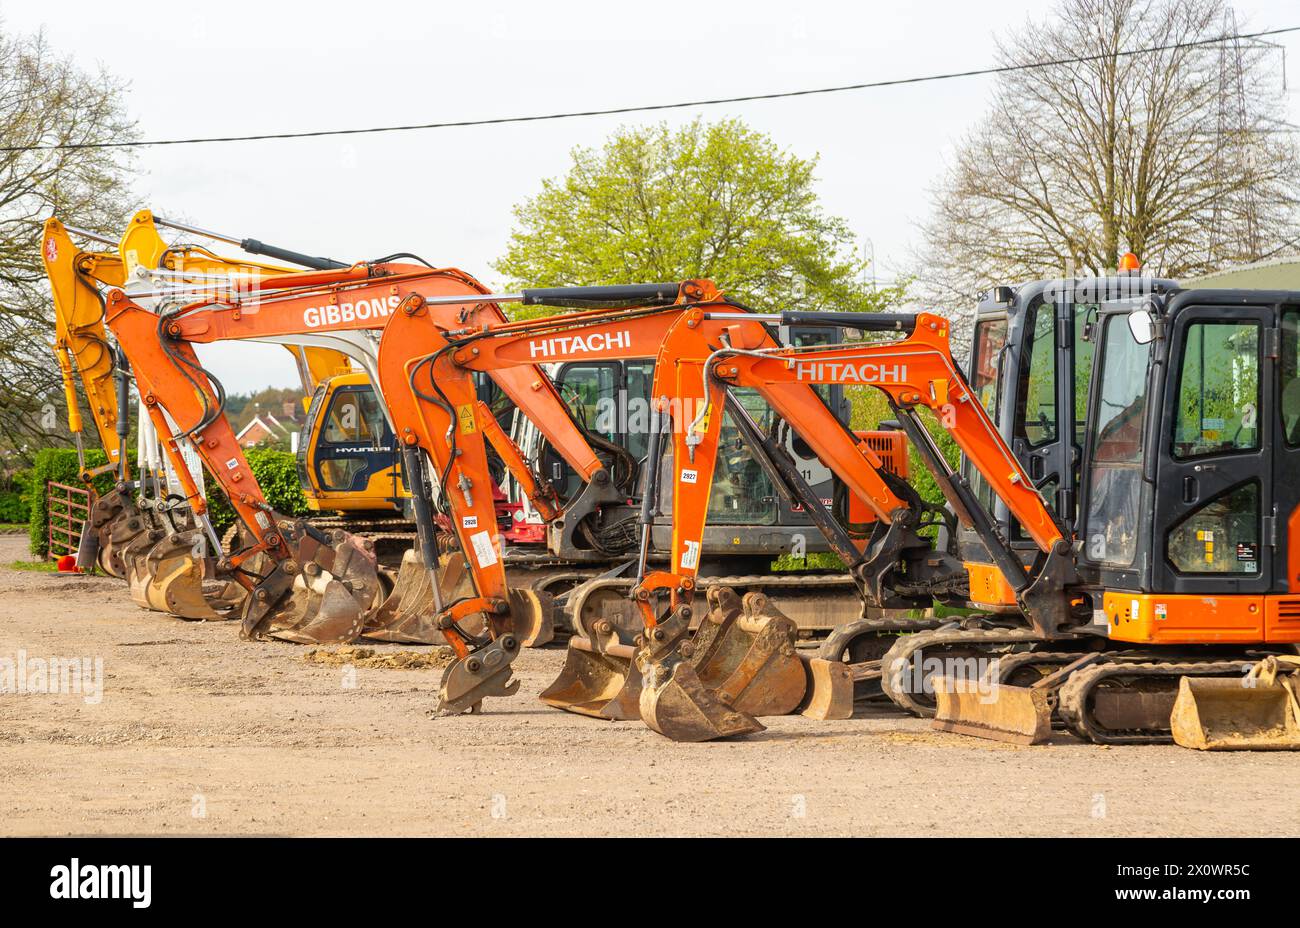 Hitachi tracked excavator diggers on display at used machinery auction, Campsea Ashe, Suffolk, England, UK Stock Photo